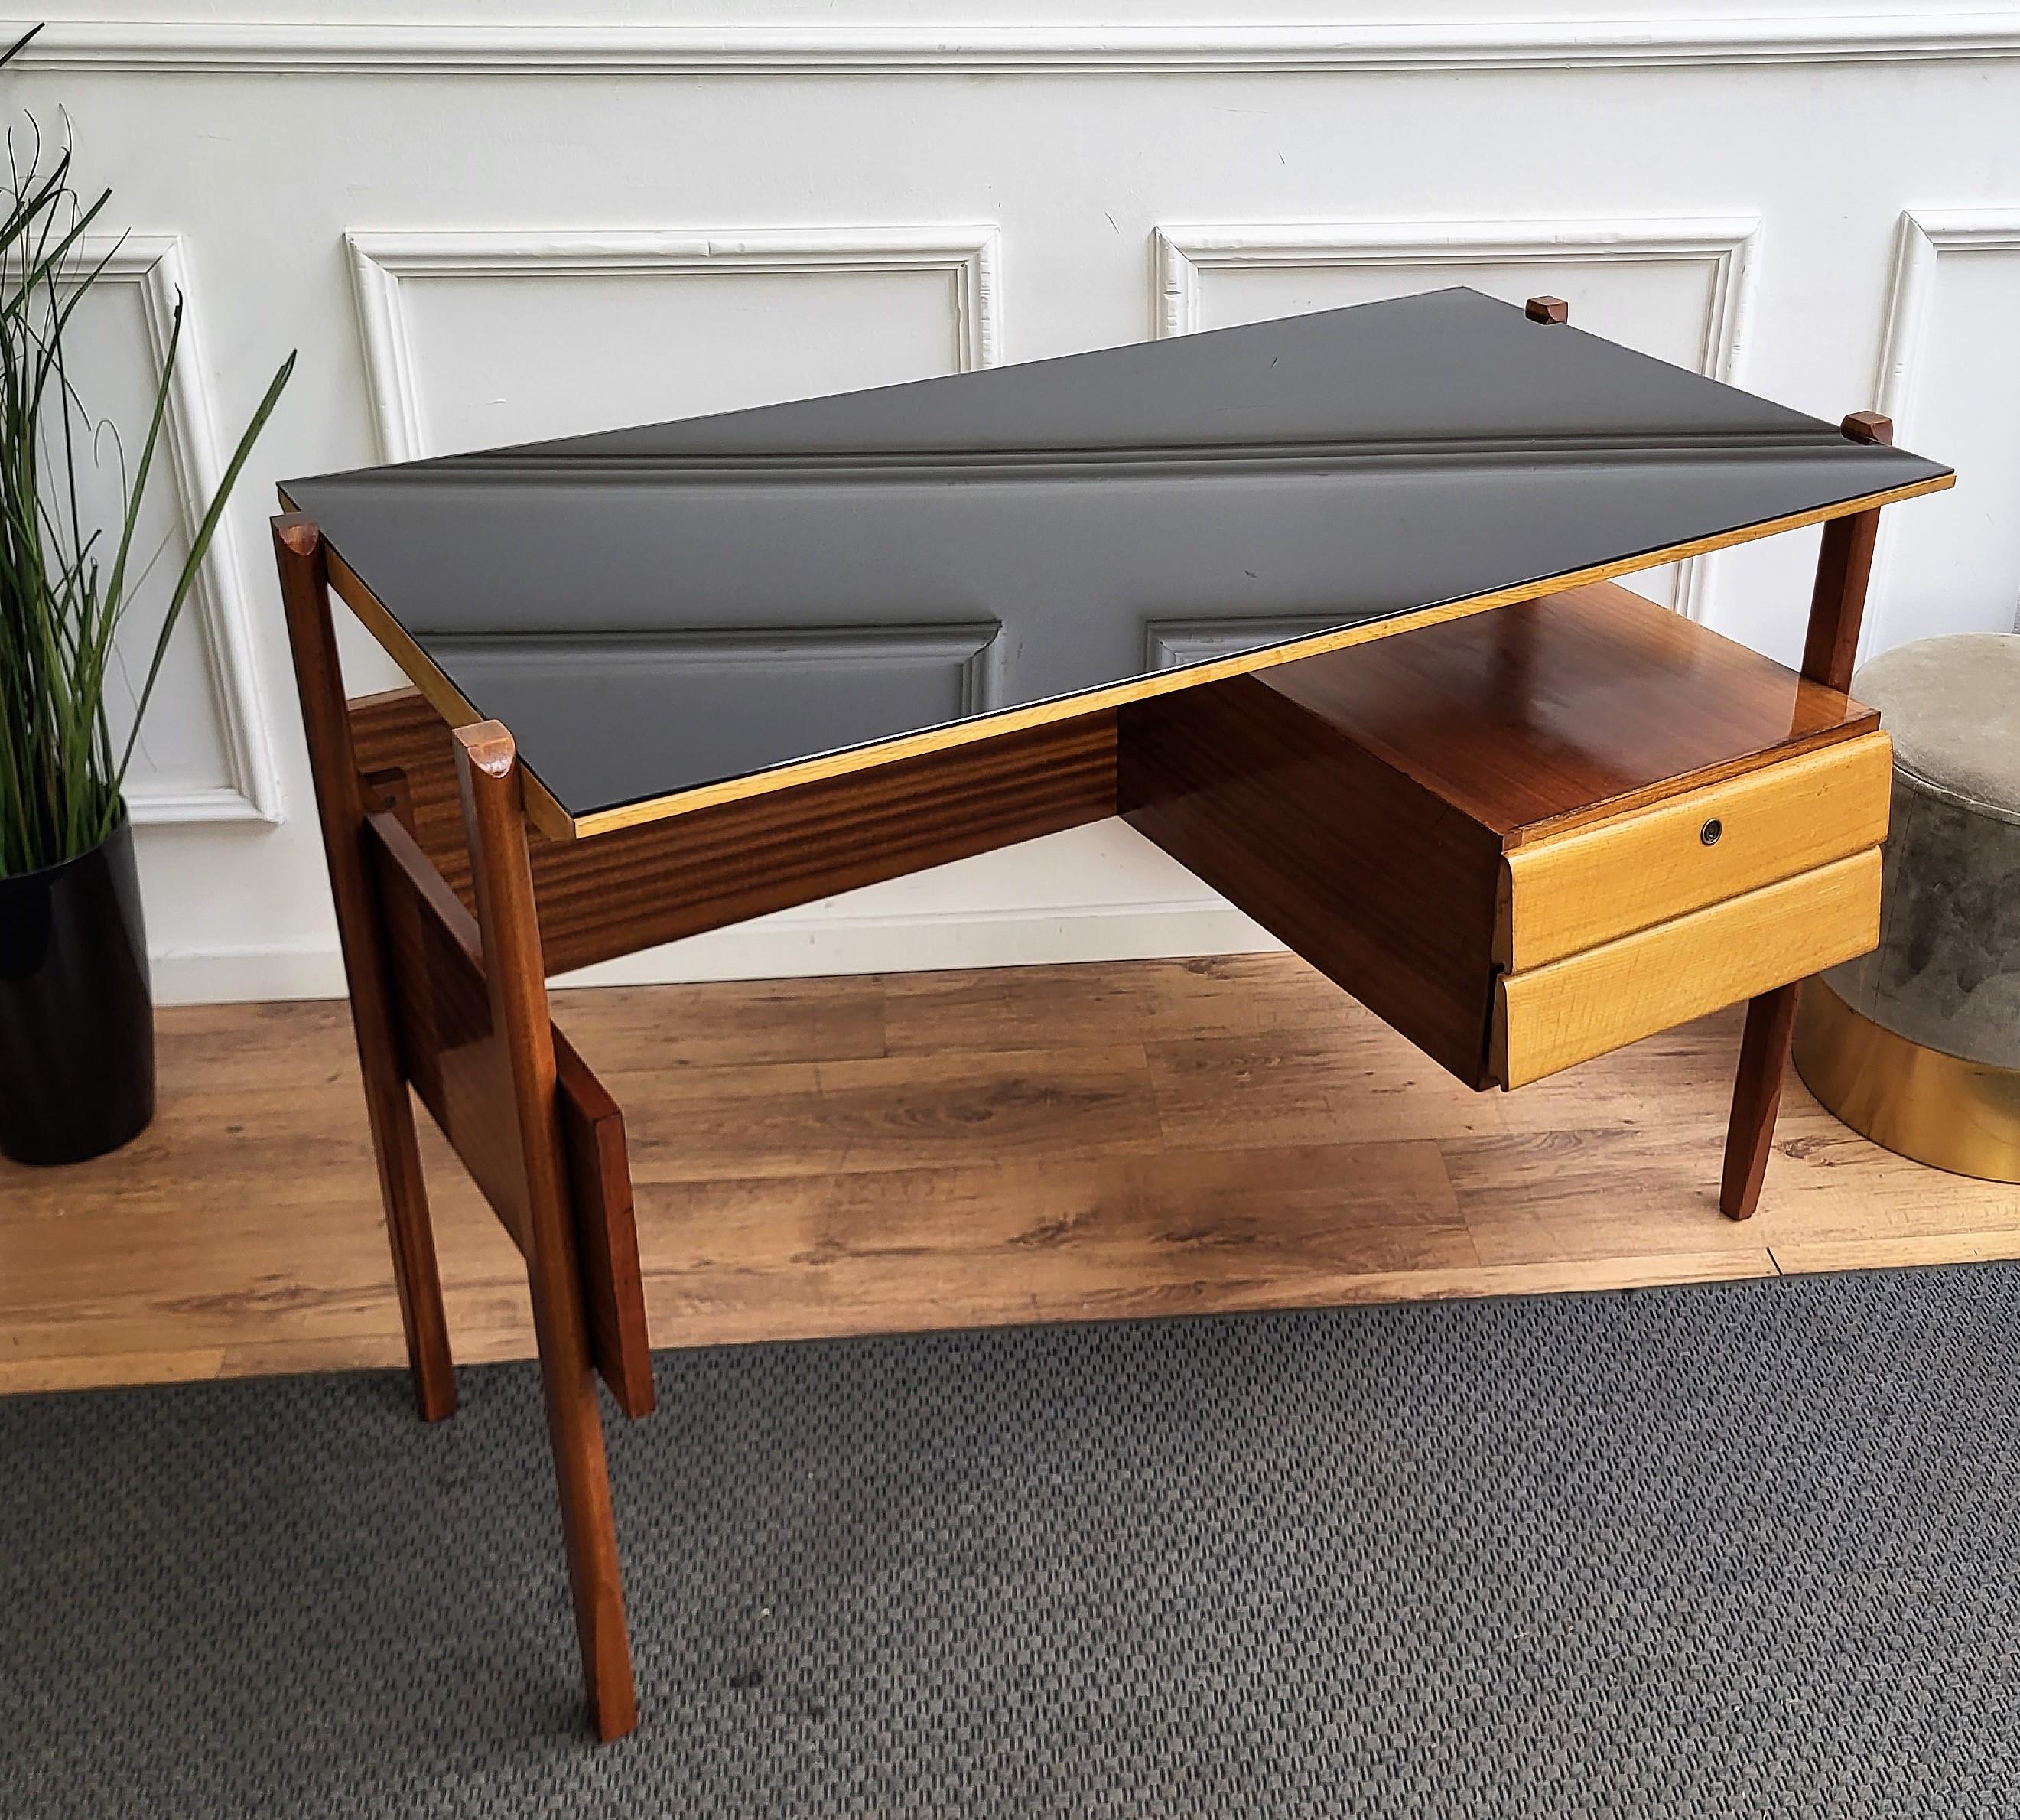 Very elegant Italian Mid-Century Modern desk or writing table, inspired to Scandinavian Modern furniture from Swedish / Danish style of the 2 side shaped legs in solid wood and the two drawers and brass key. This beautiful piece is completed by the